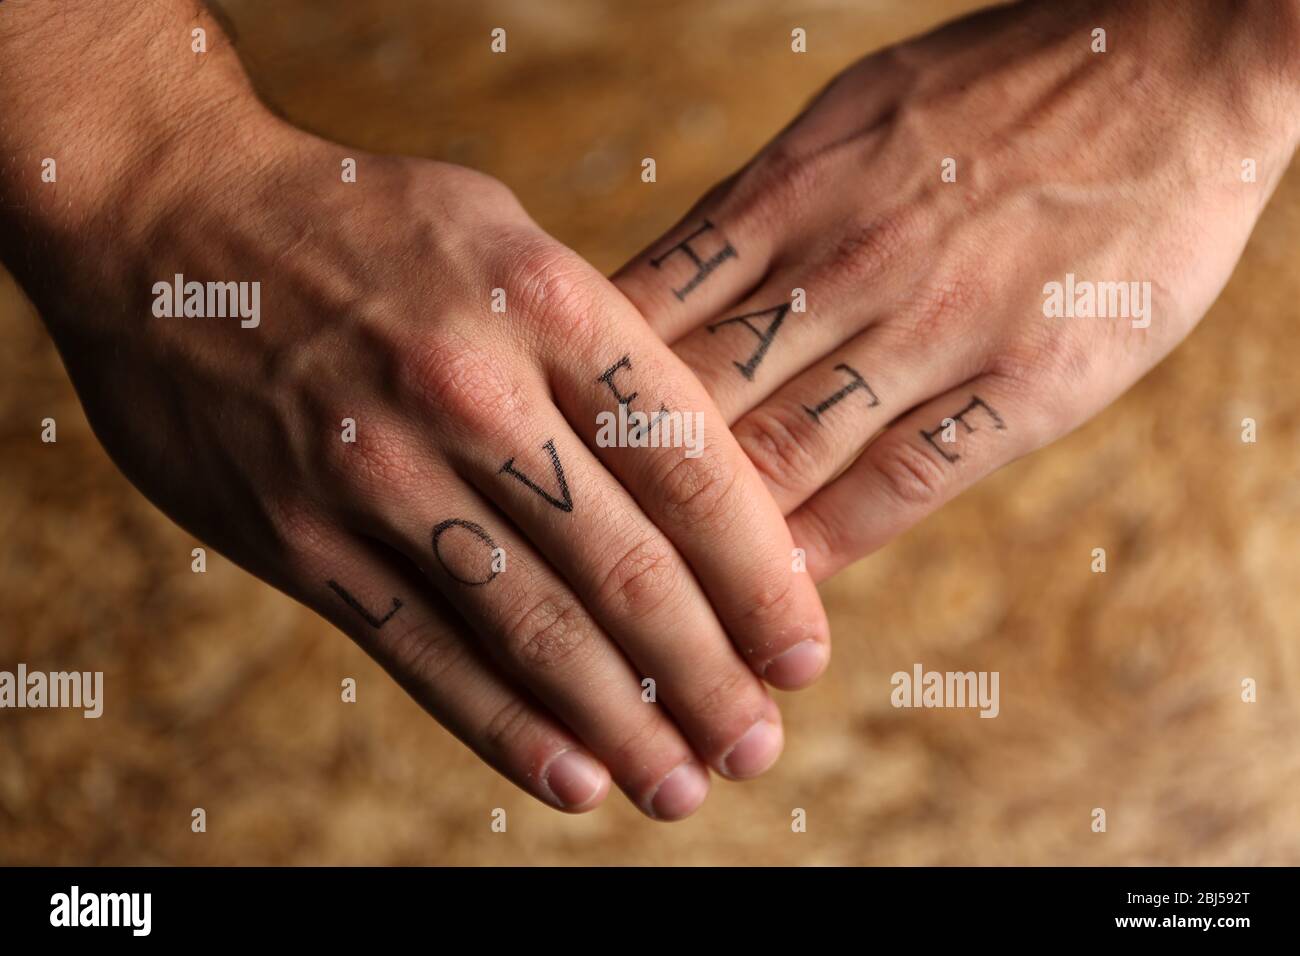 Tattoo inscriptions on male fingers drawn with marker Stock Photo